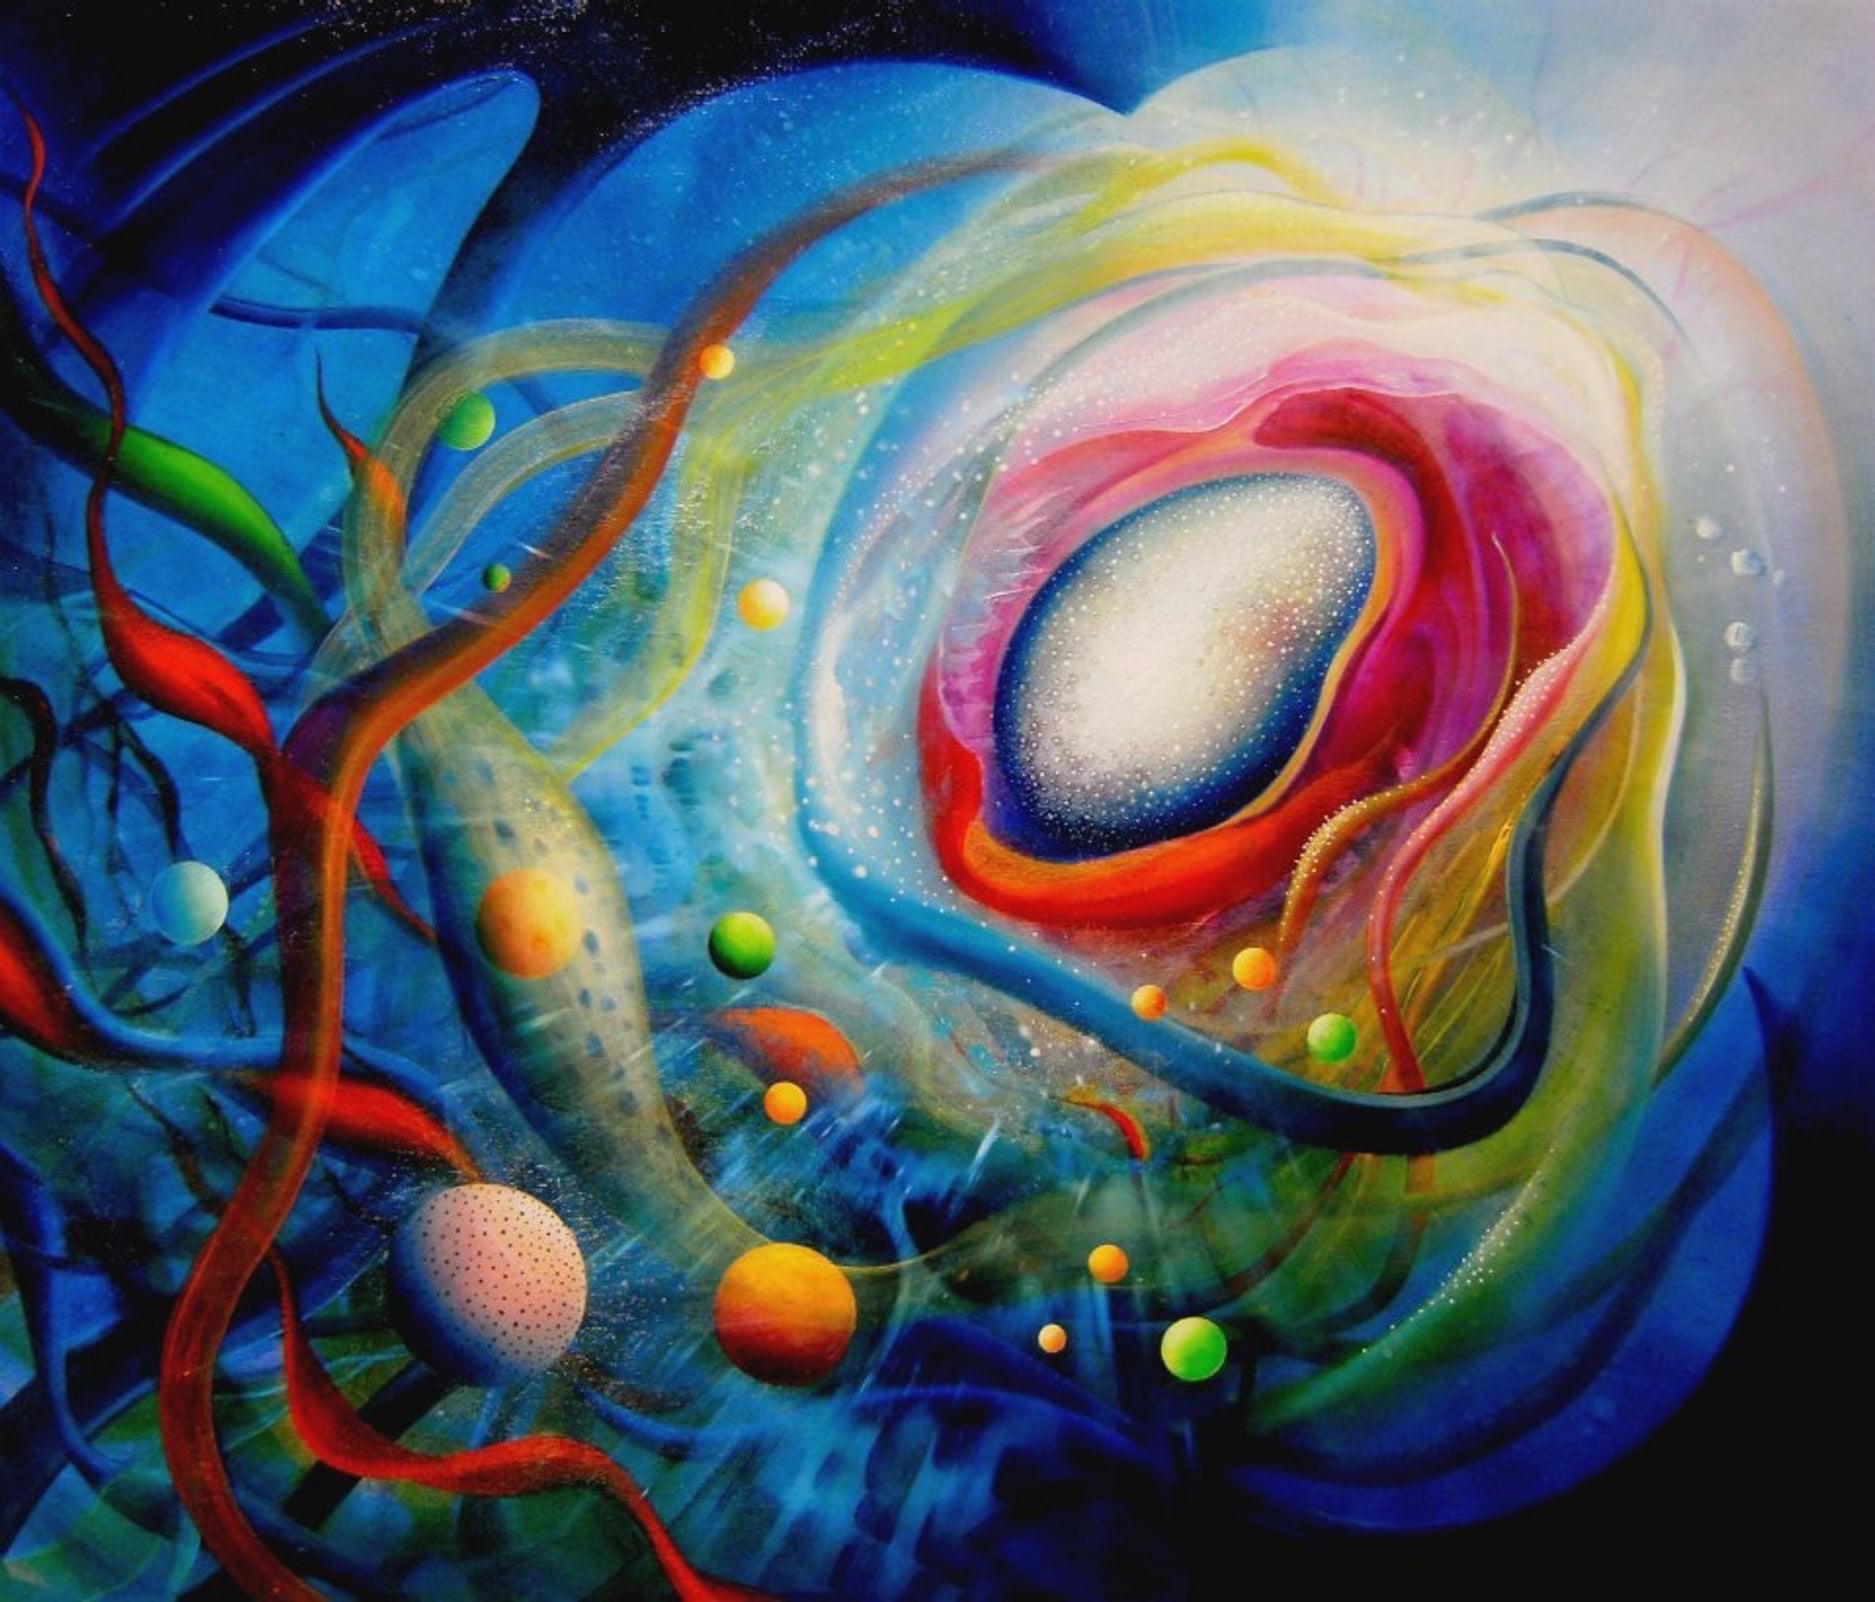 SPHERE NT (neuron ~ transmitter) * oil on canvas * 70 x 80 cm * MMXII * sold